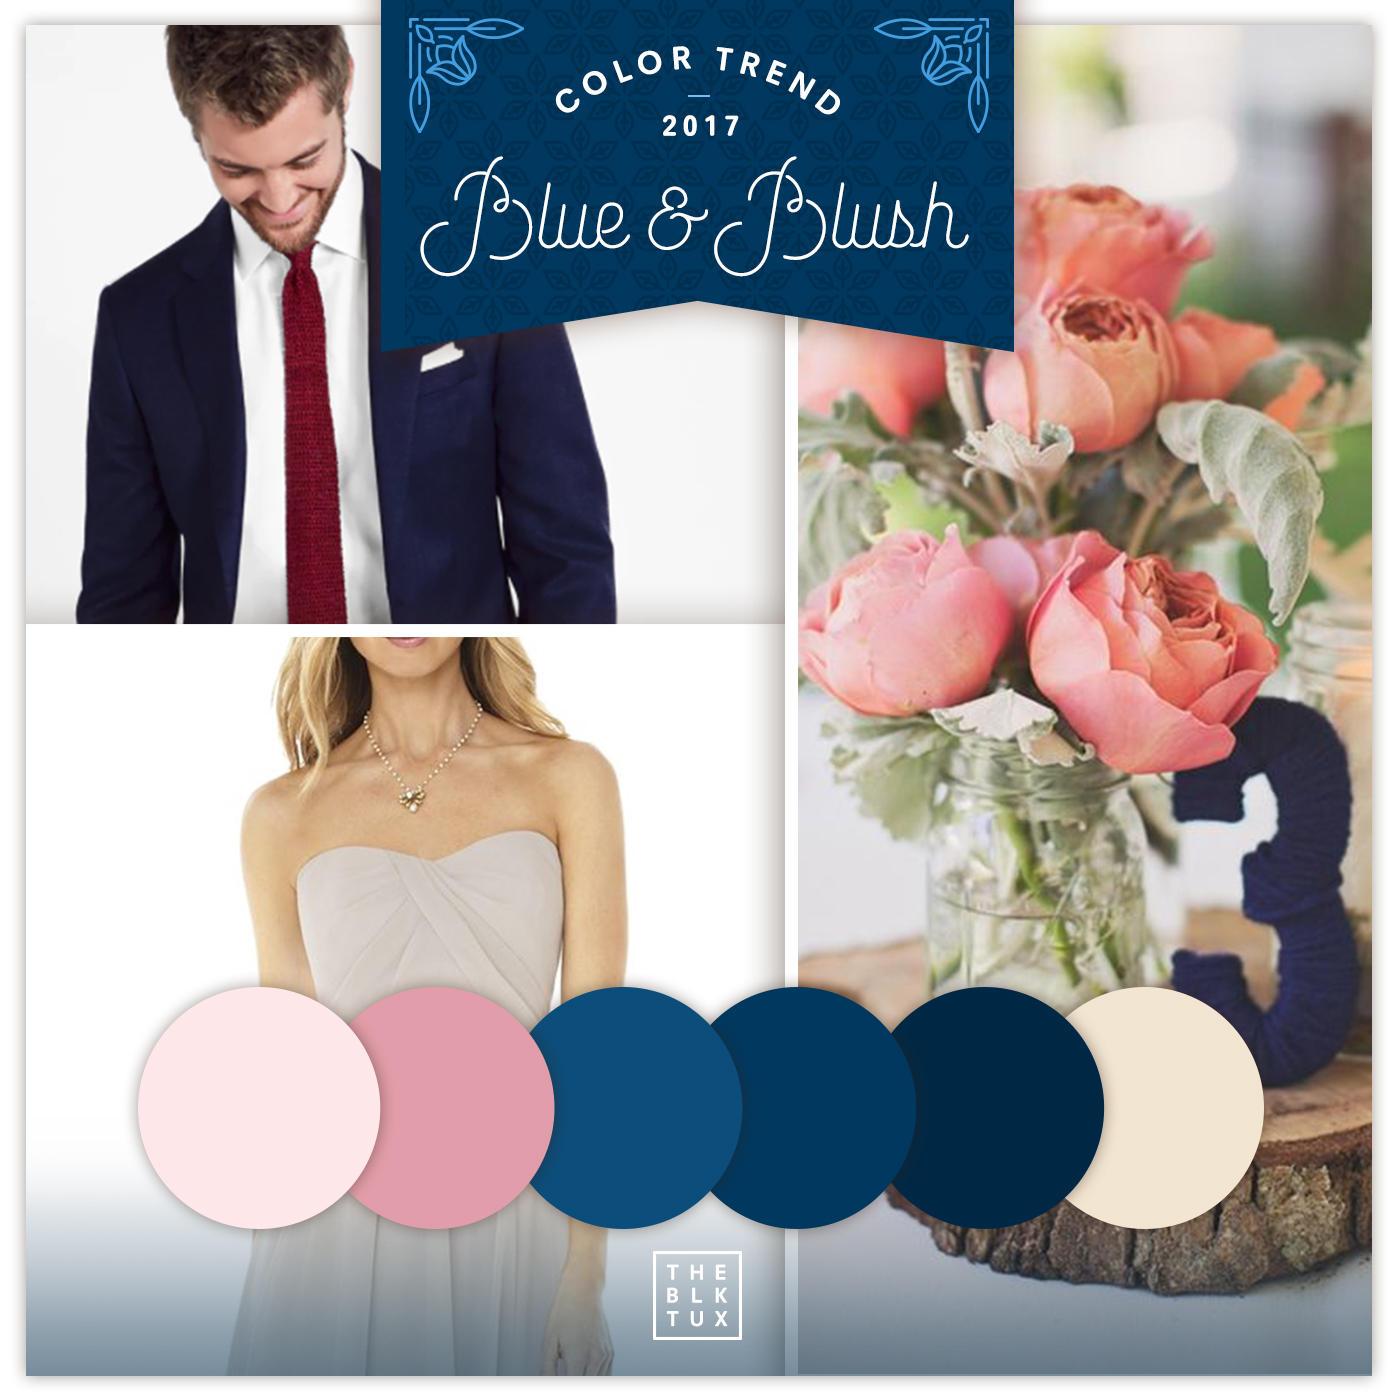 Blue and Blush Wedding Color trends